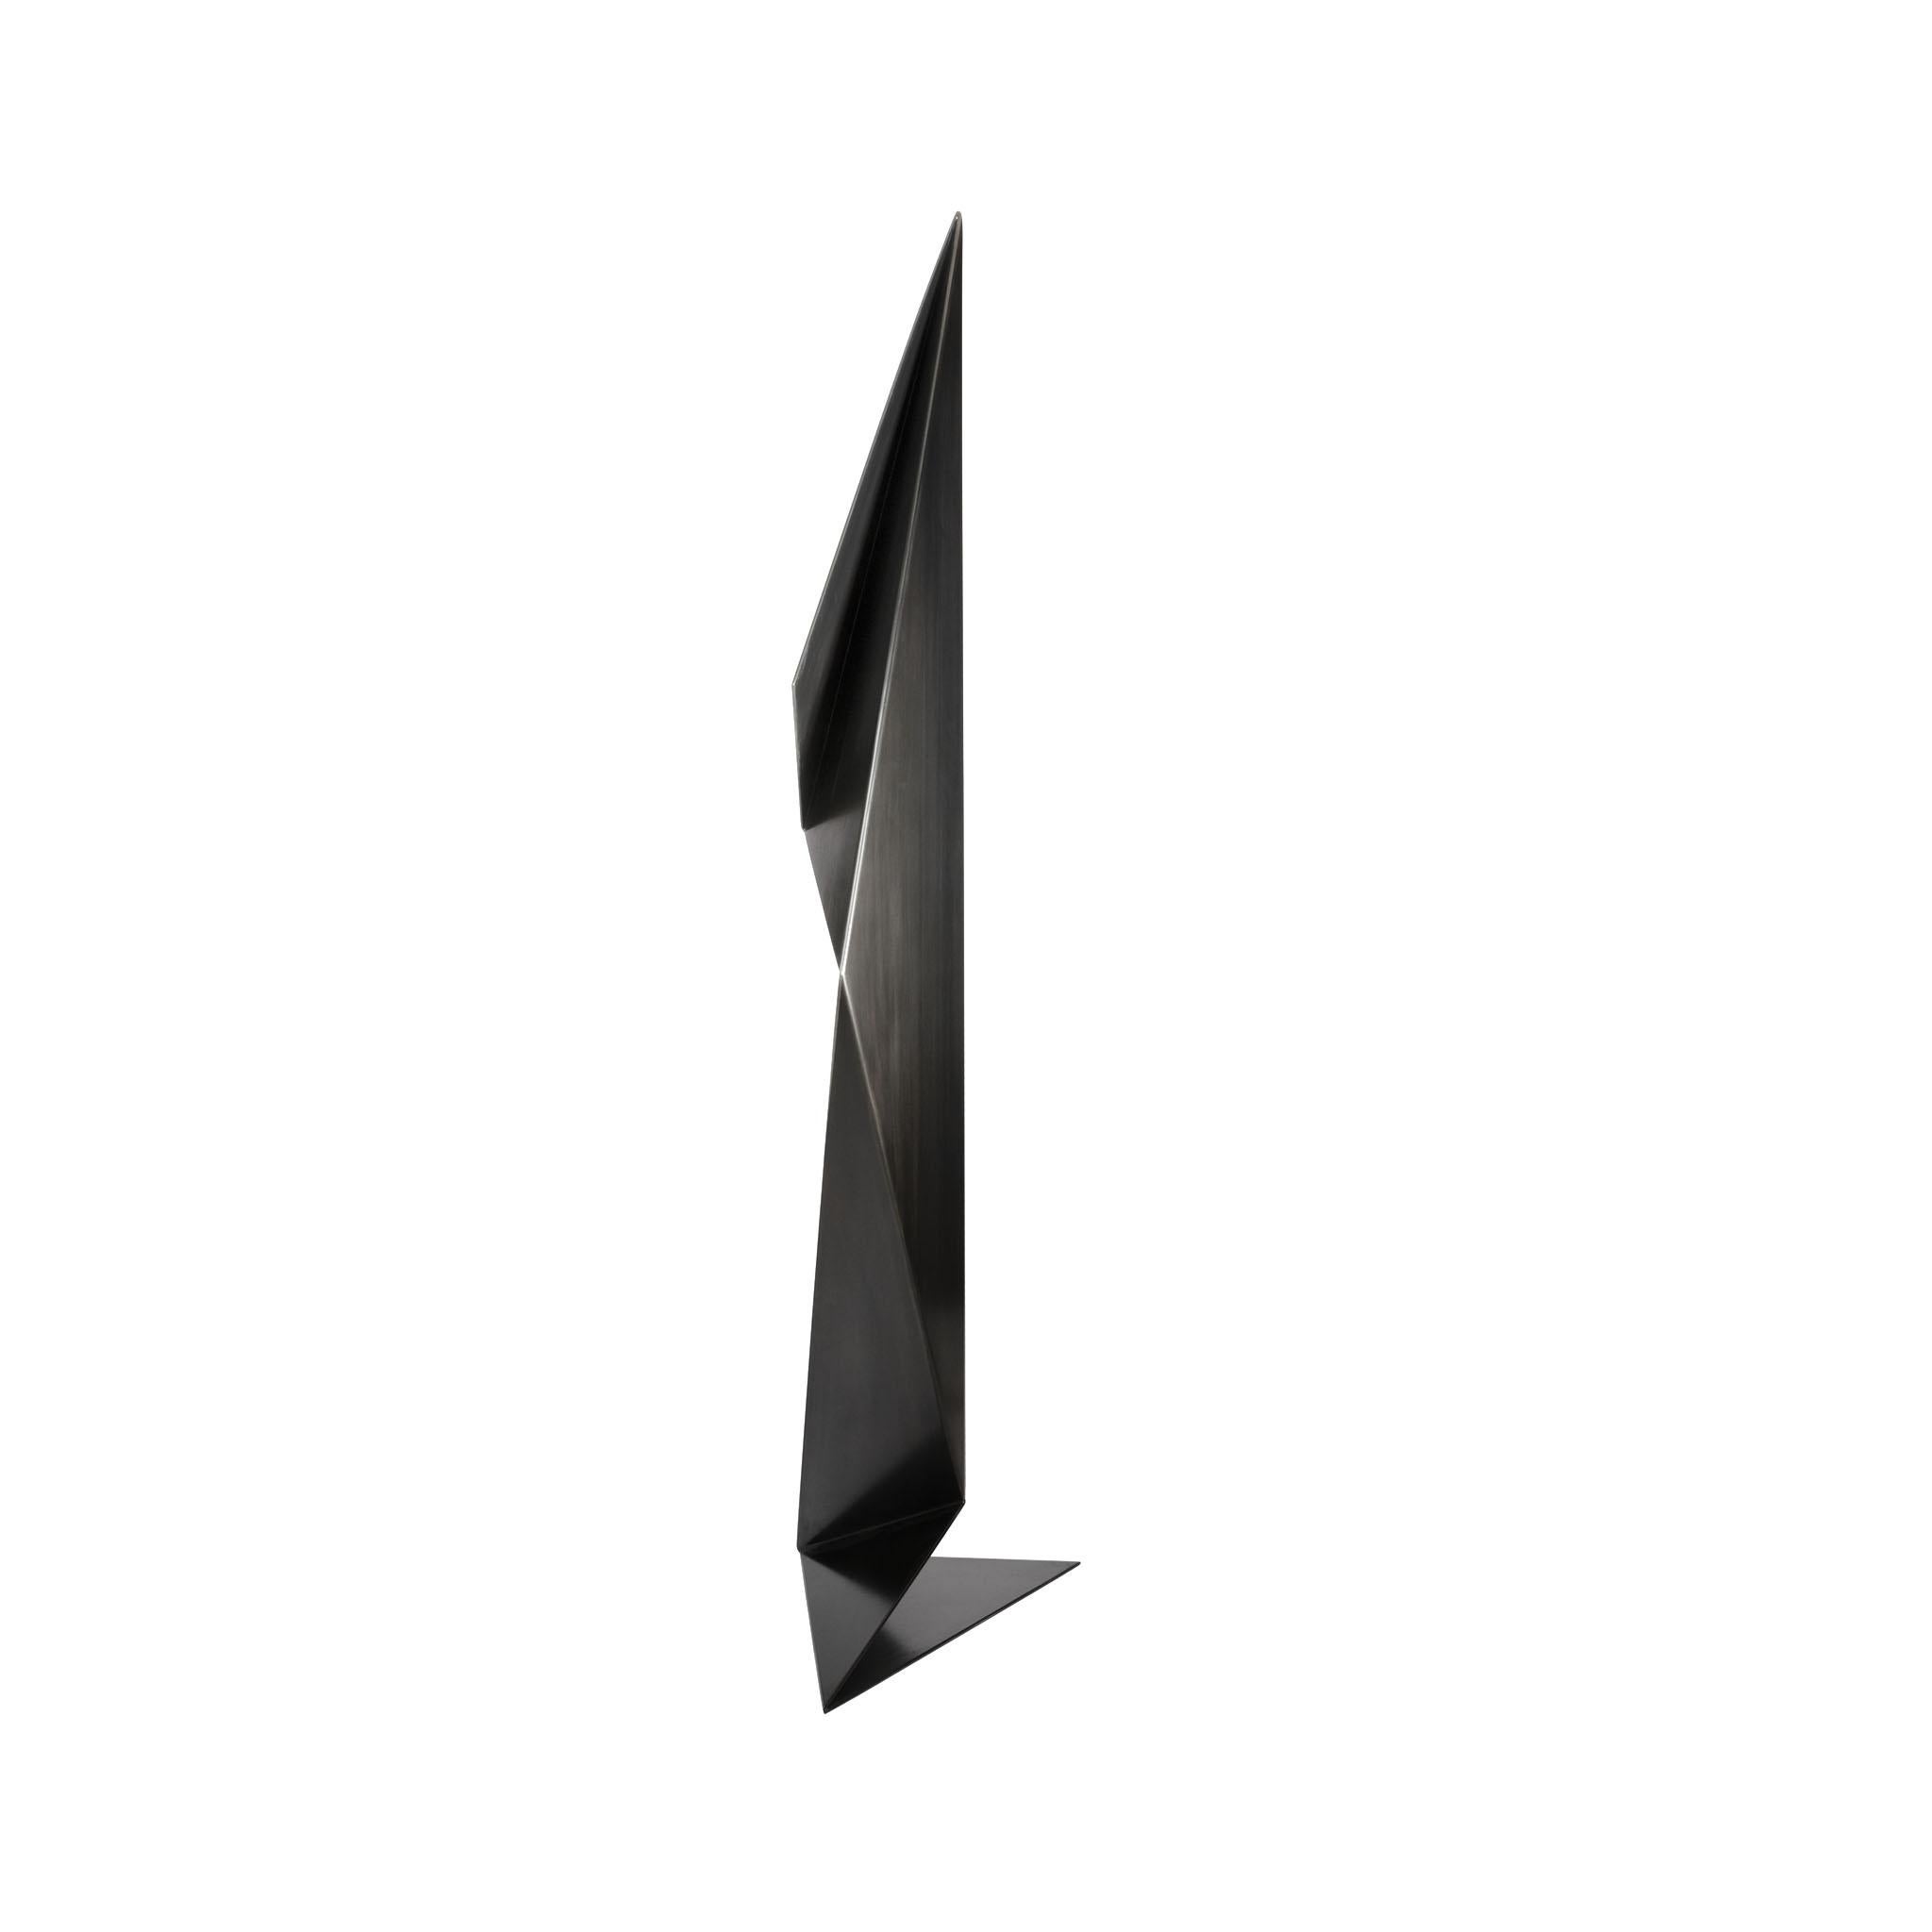 Steel Tall Abstract Origami Art Metal Sculpture Figure in a Hand Blackened Finish For Sale